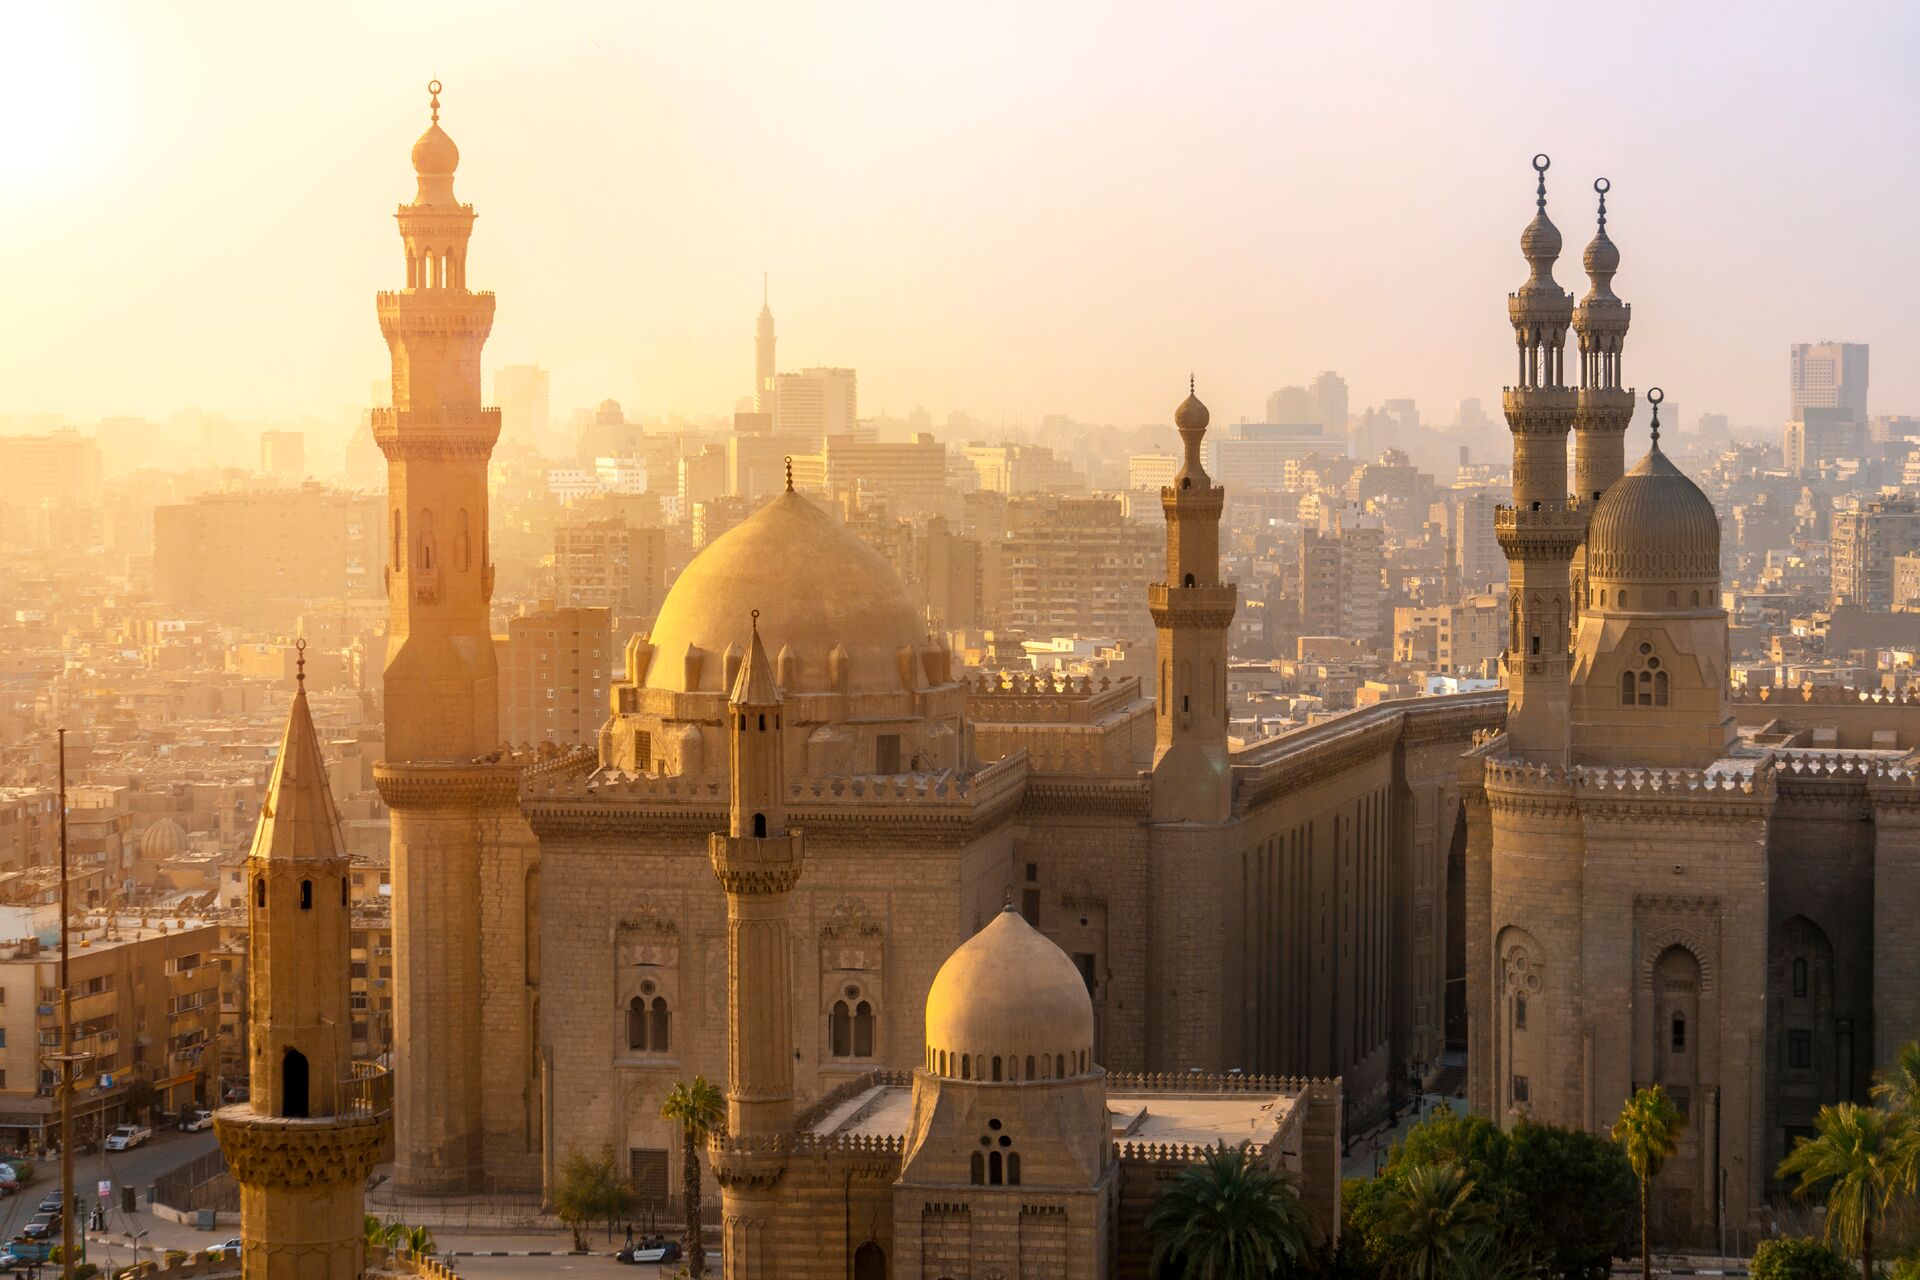 Image of Cairo city, looking down on the Mosques of Sultan Hassan and Al-Rifai